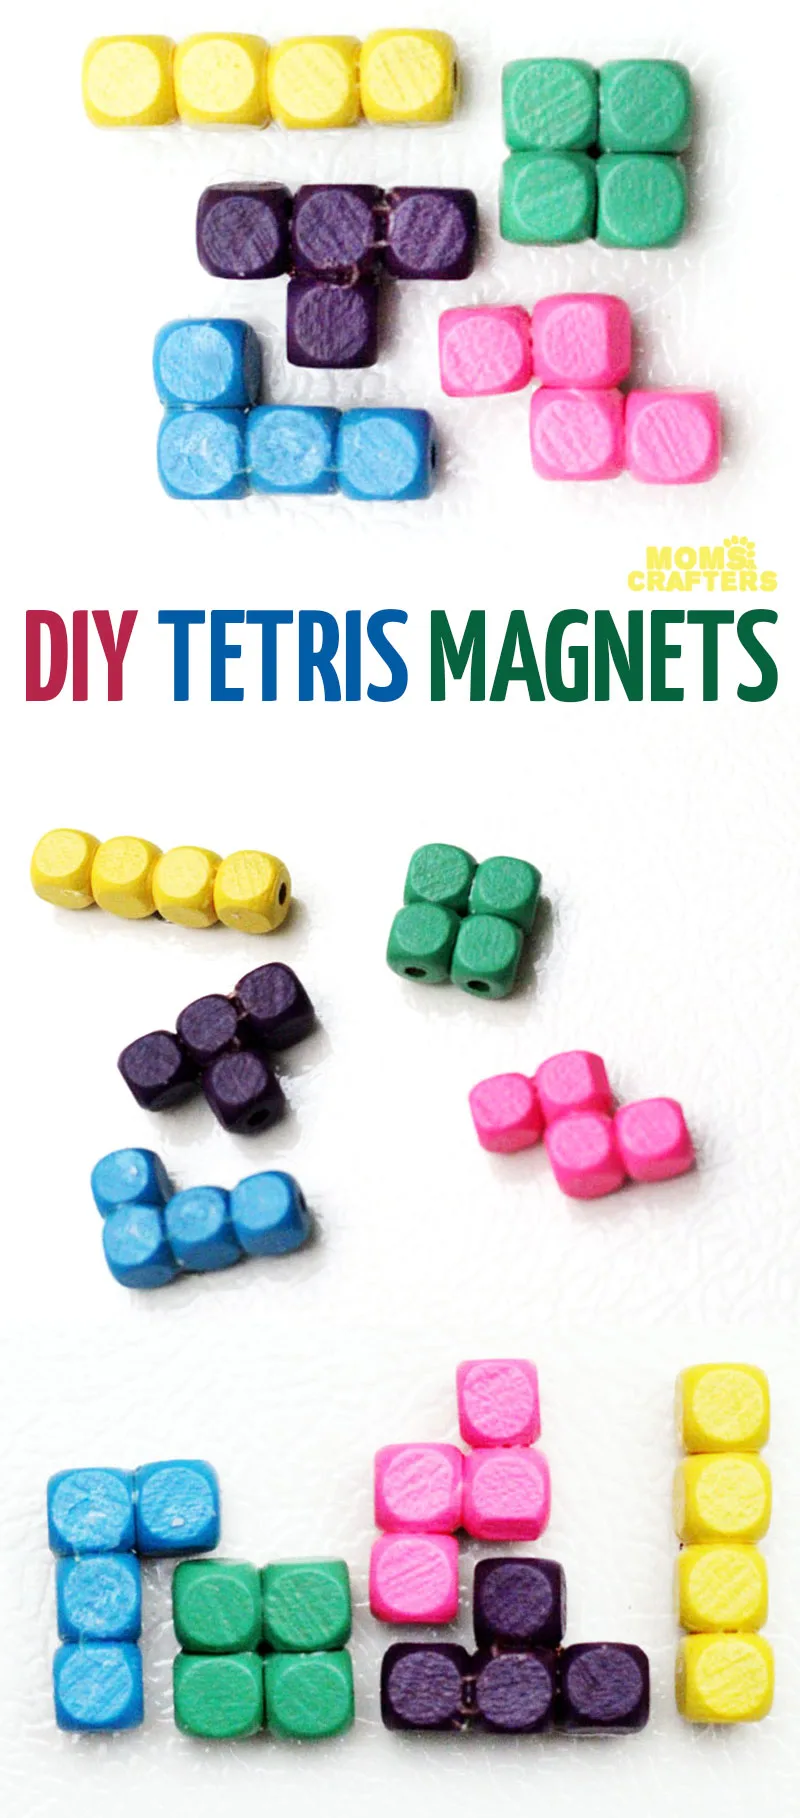 Are you a Tetris fan or do you know one? You'll love this Tetris craft! Tetris pieces magnets are quick and easy to make and are a great cheap DIY gift.